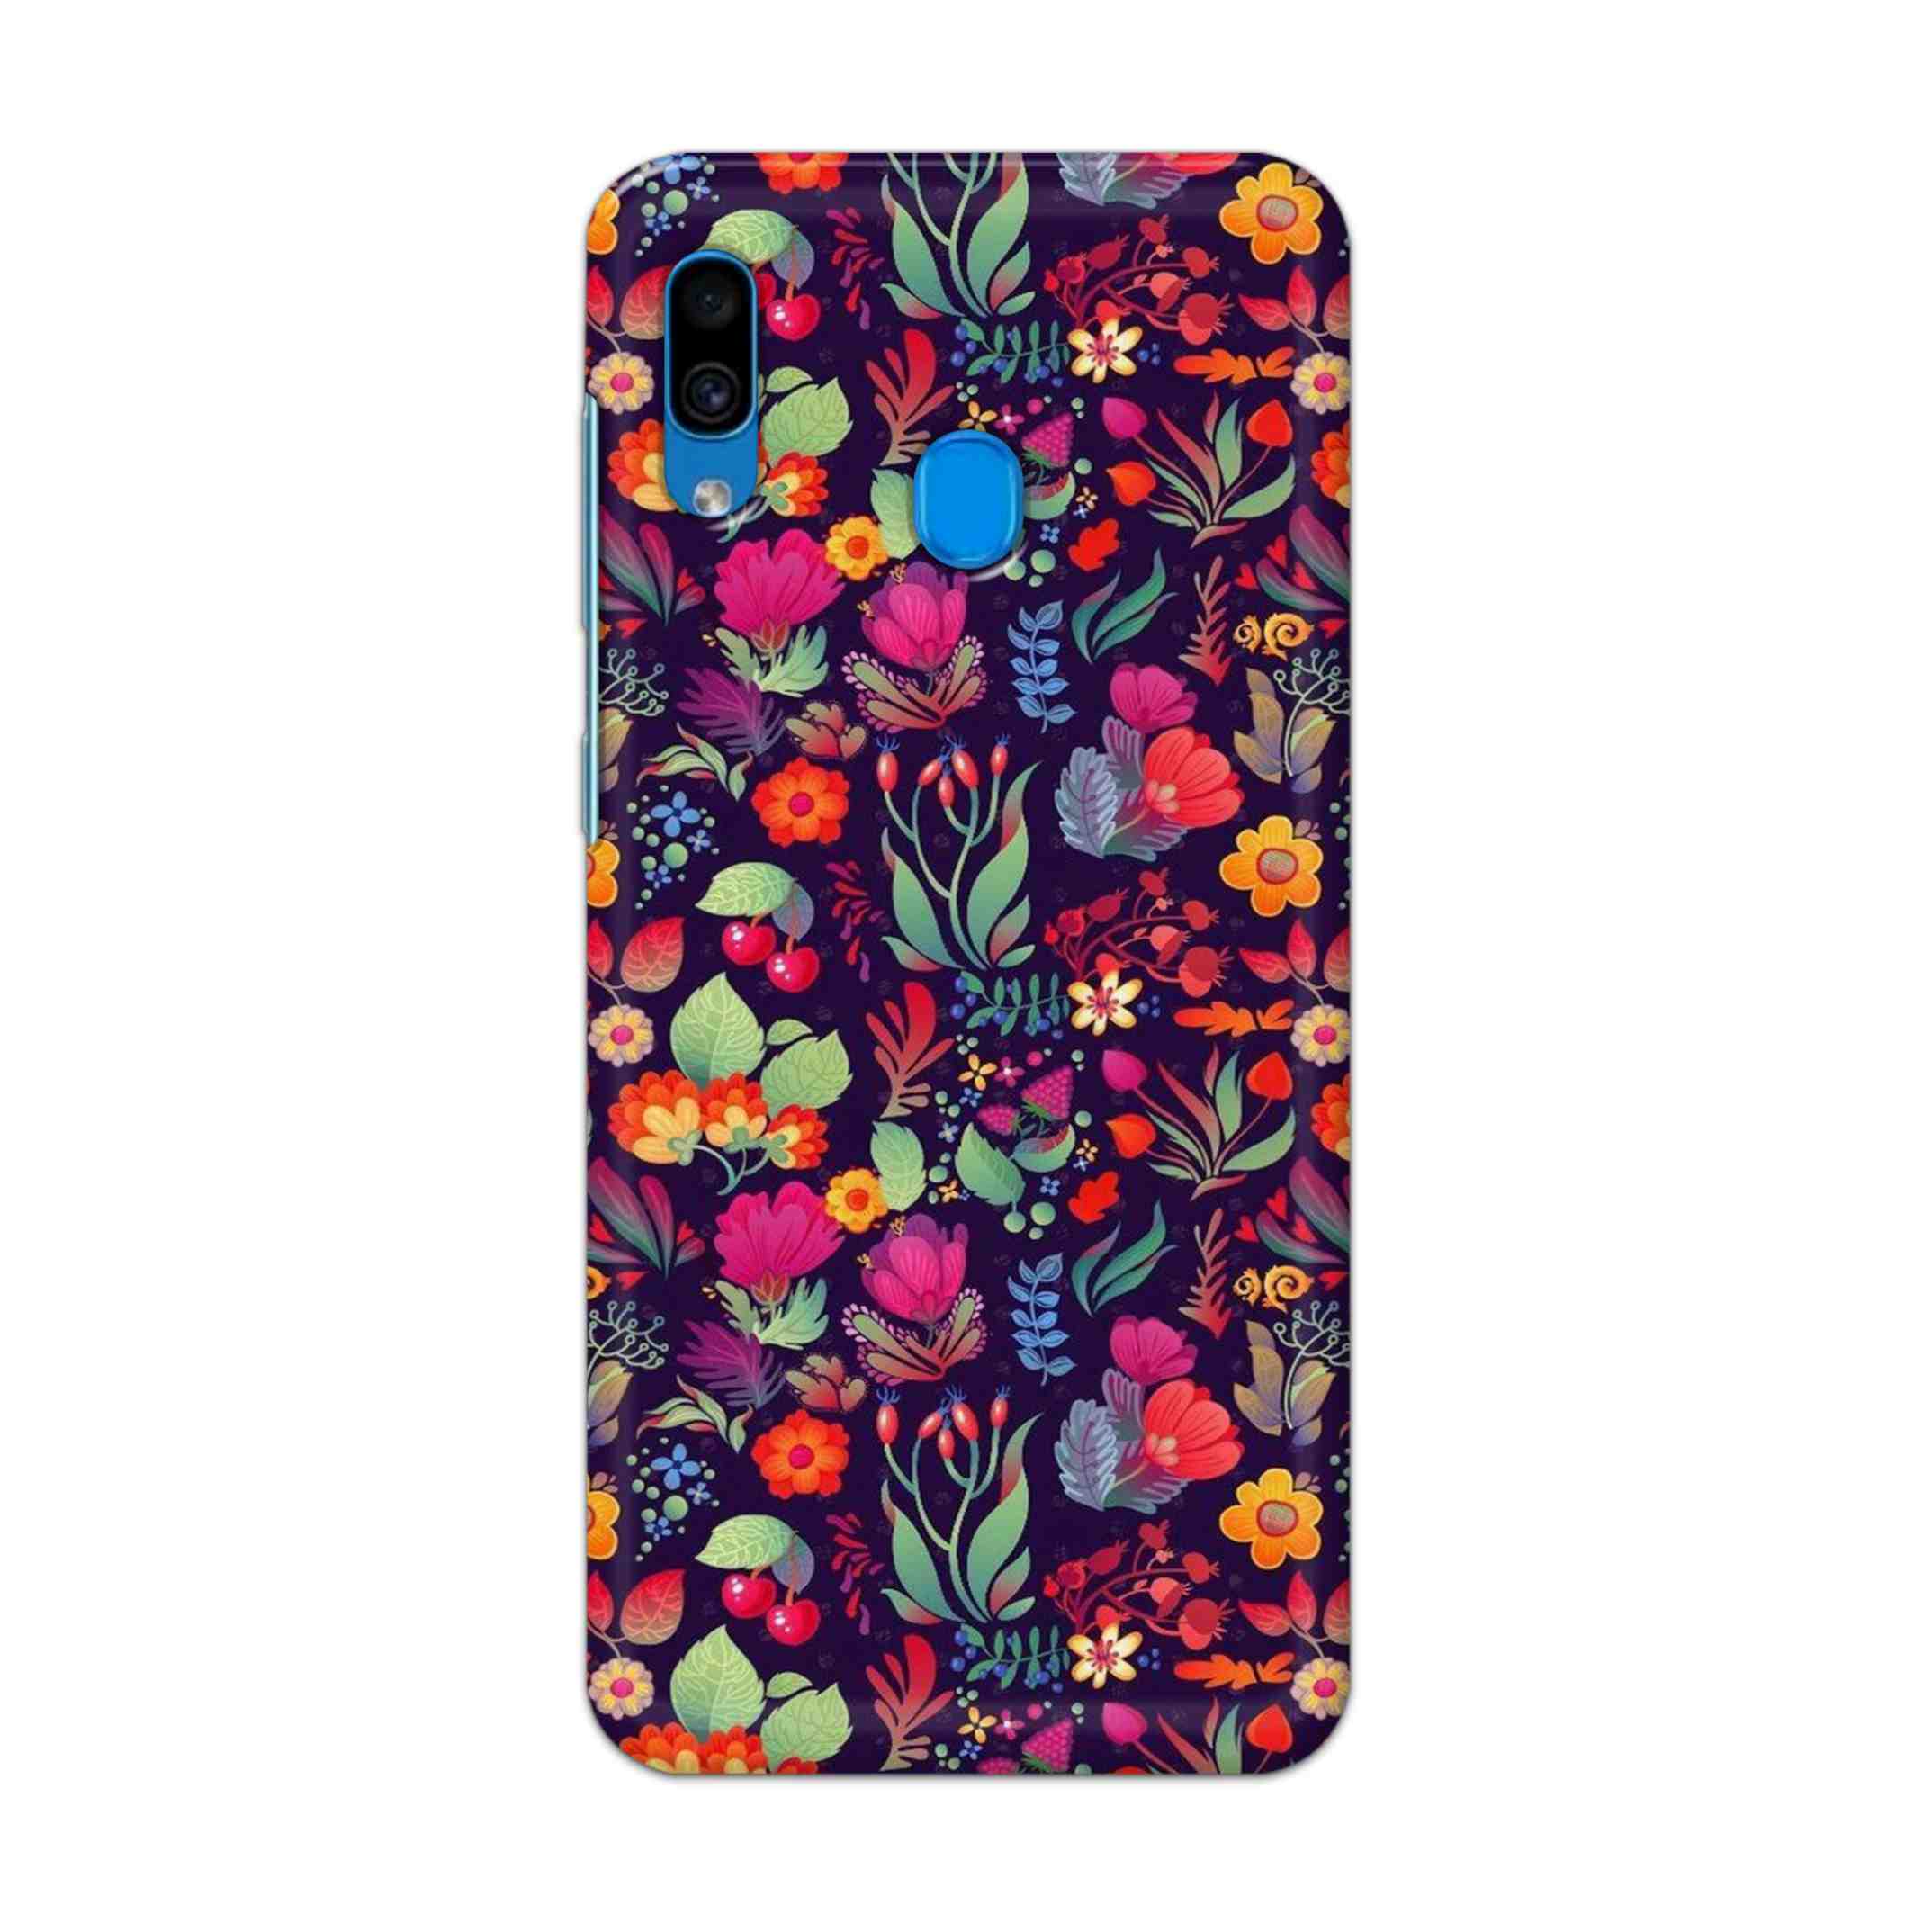 Buy Fruits Flower Hard Back Mobile Phone Case Cover For Samsung Galaxy A30 Online